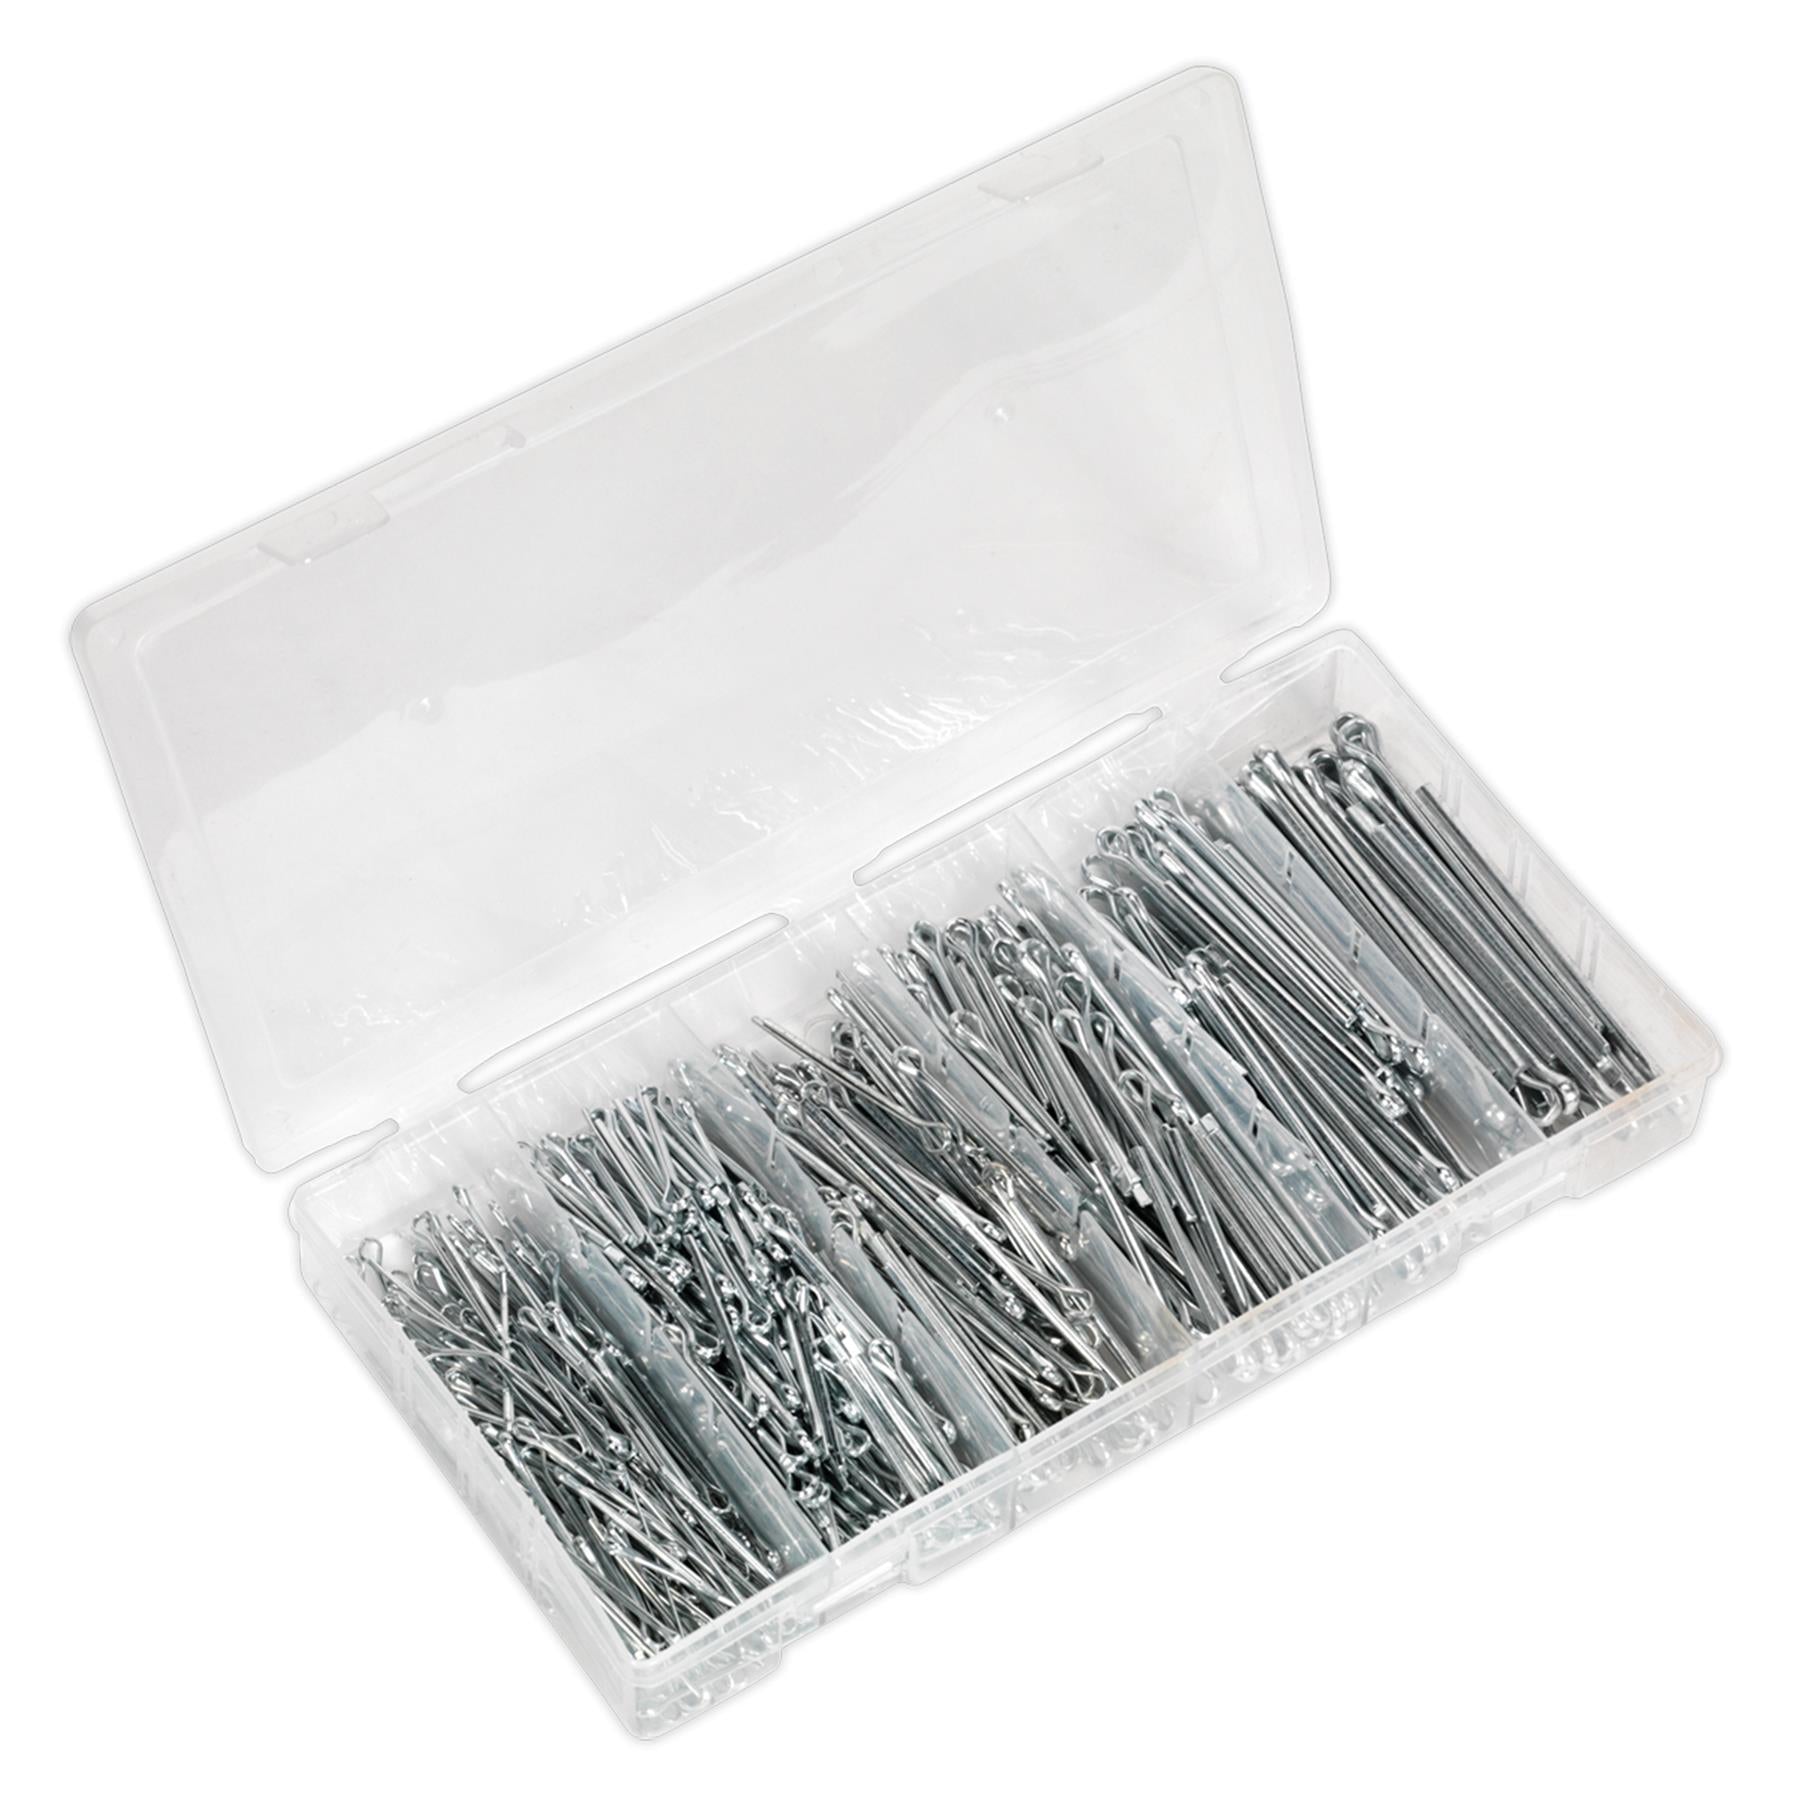 Sealey Assorted Split Pin Cotter Pins Small Sizes Imperial & Metric 555 PC